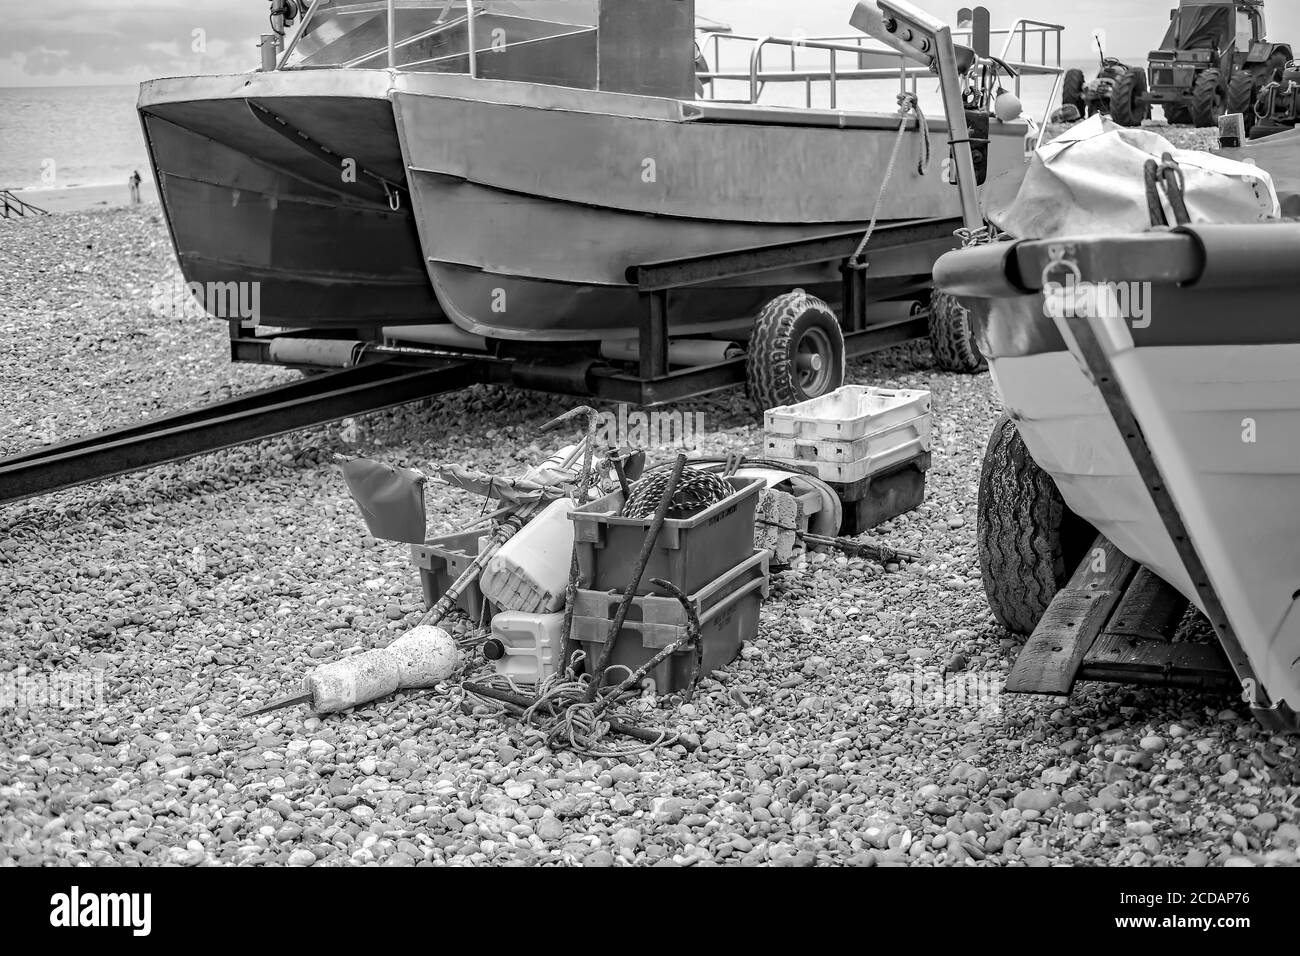 https://c8.alamy.com/comp/2CDAP76/a-black-and-white-photo-of-a-selective-focus-on-fishing-gear-on-a-shingle-beach-surrounded-by-fishing-boats-this-is-a-scene-on-cromer-beach-a-famous-crab-fishing-beach-on-the-north-norfolk-coast-2CDAP76.jpg